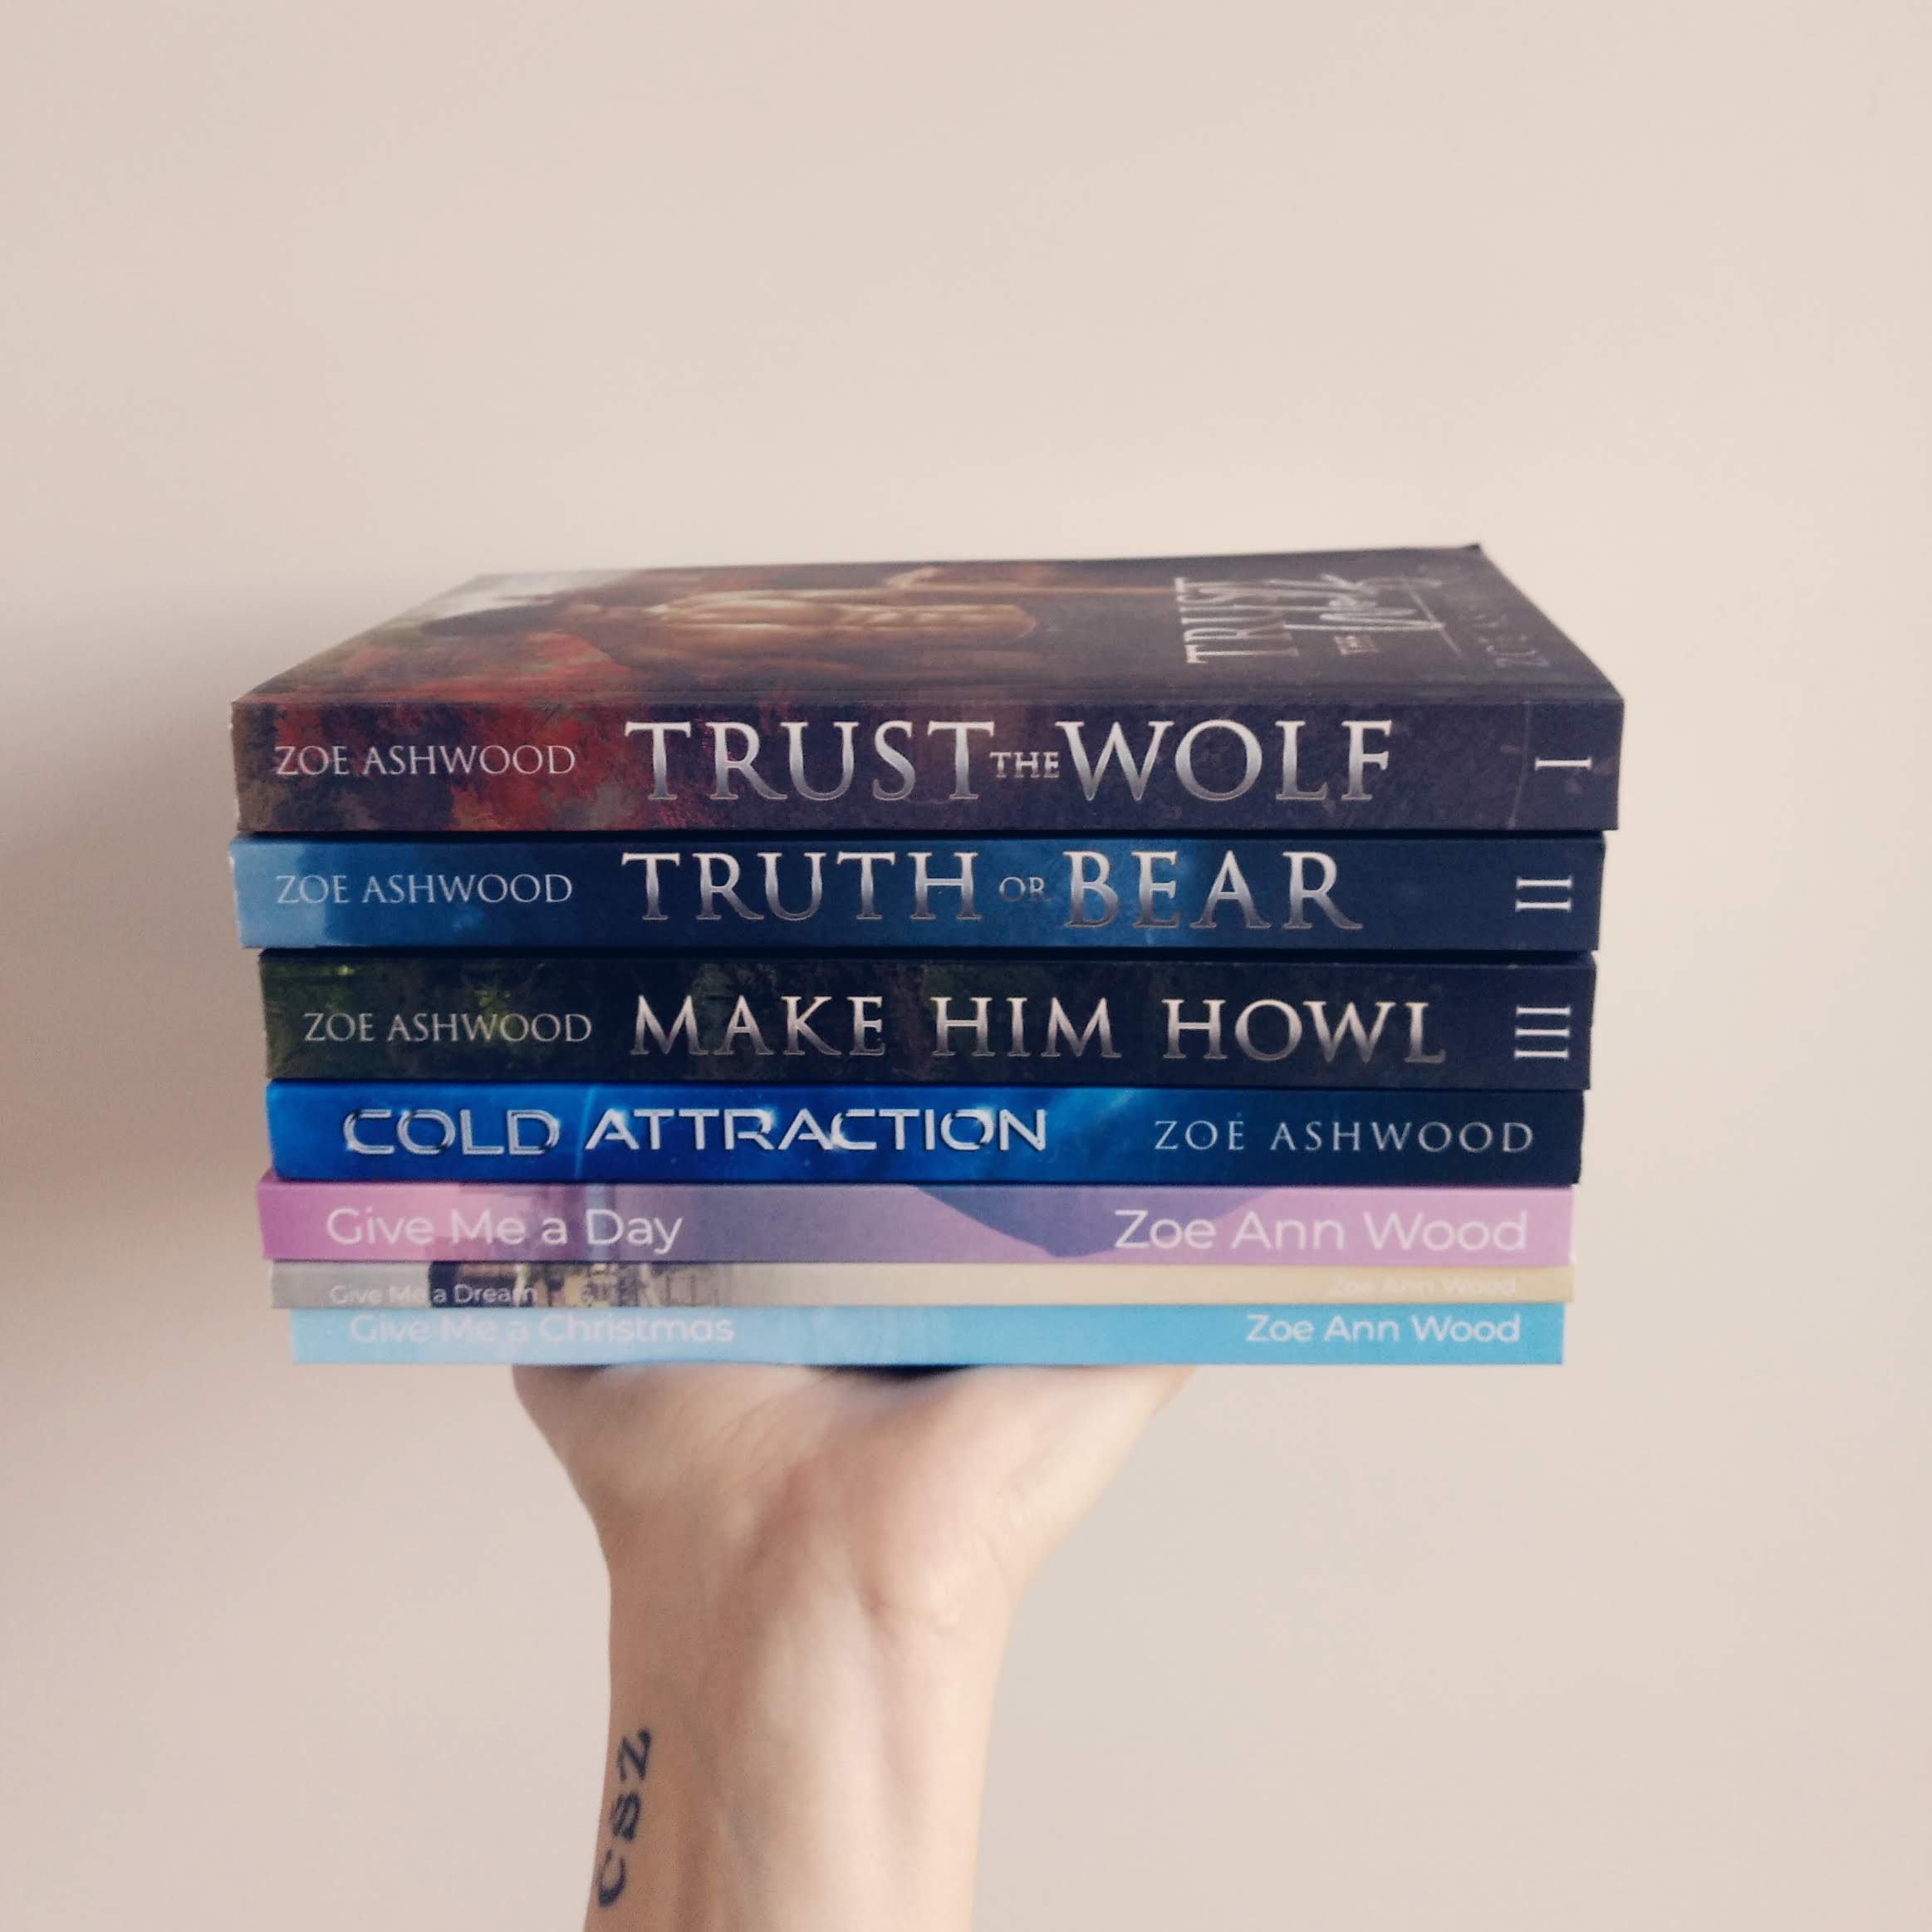 A stack of paperback books by Zoe Ashwood and Zoe Ann Wood.